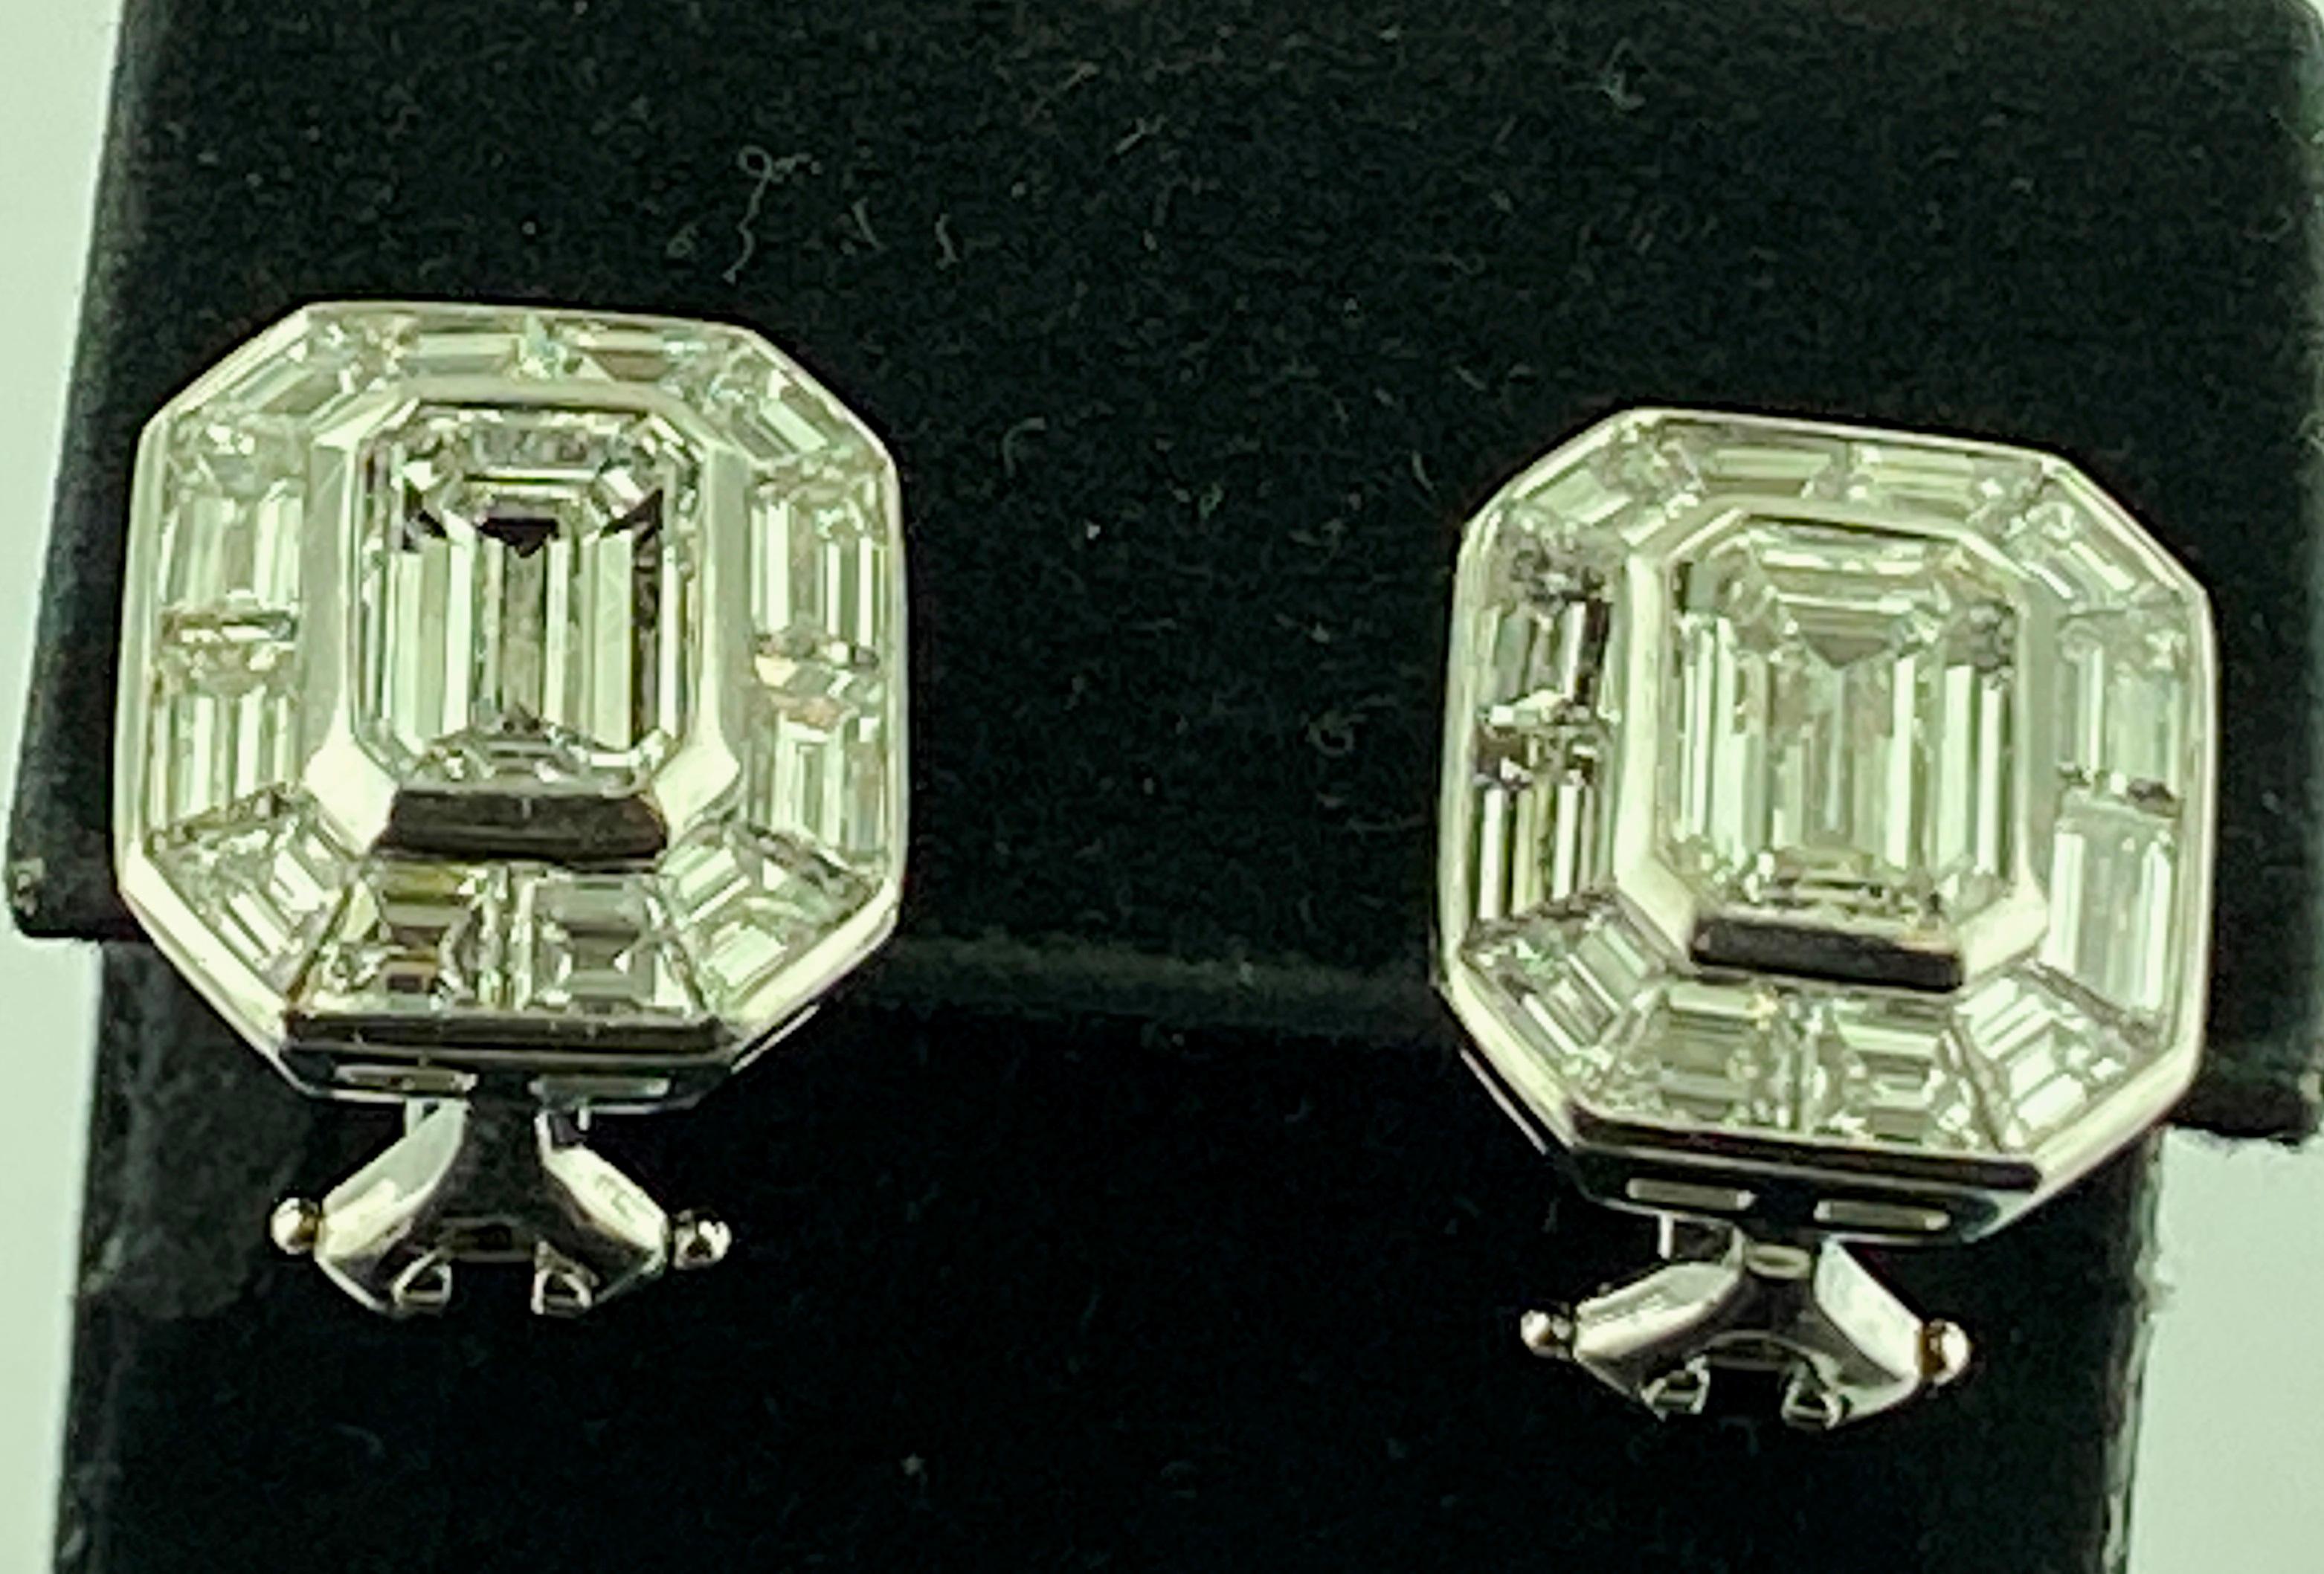 Set in Platinum, weighing 13.4 grams in French Clips are two center Emerald Cut diamonds with a total diamond weight of 2.40 carats.  Color: G-H, clarity: VS-1.  Surrounding the center emerald Cut diamonds are 24 Baguette Cut diamonds with a total